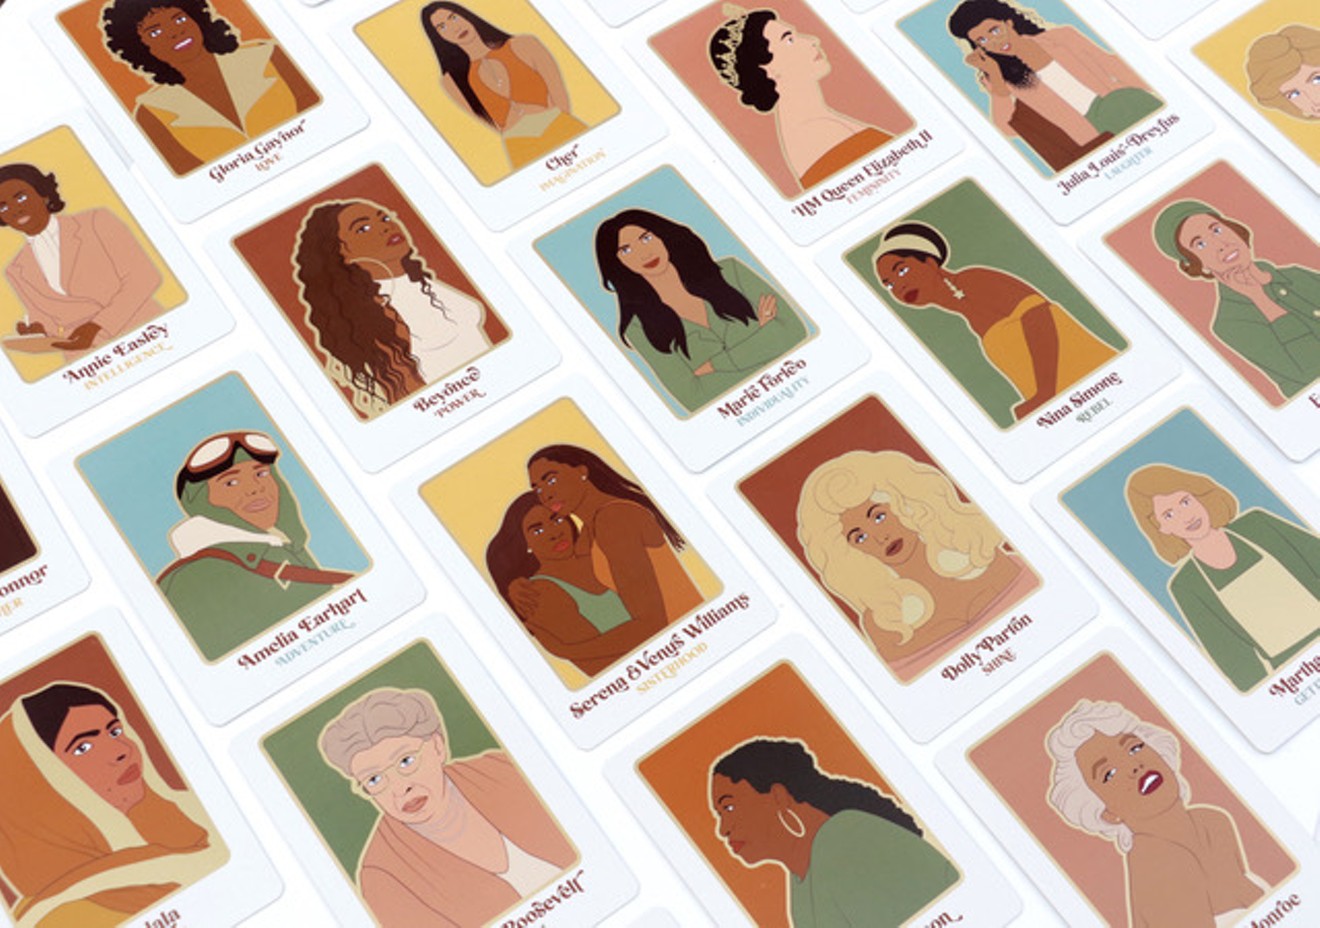 "Messages From Her" is a tarot deck that depicts inspiring women on the cards.